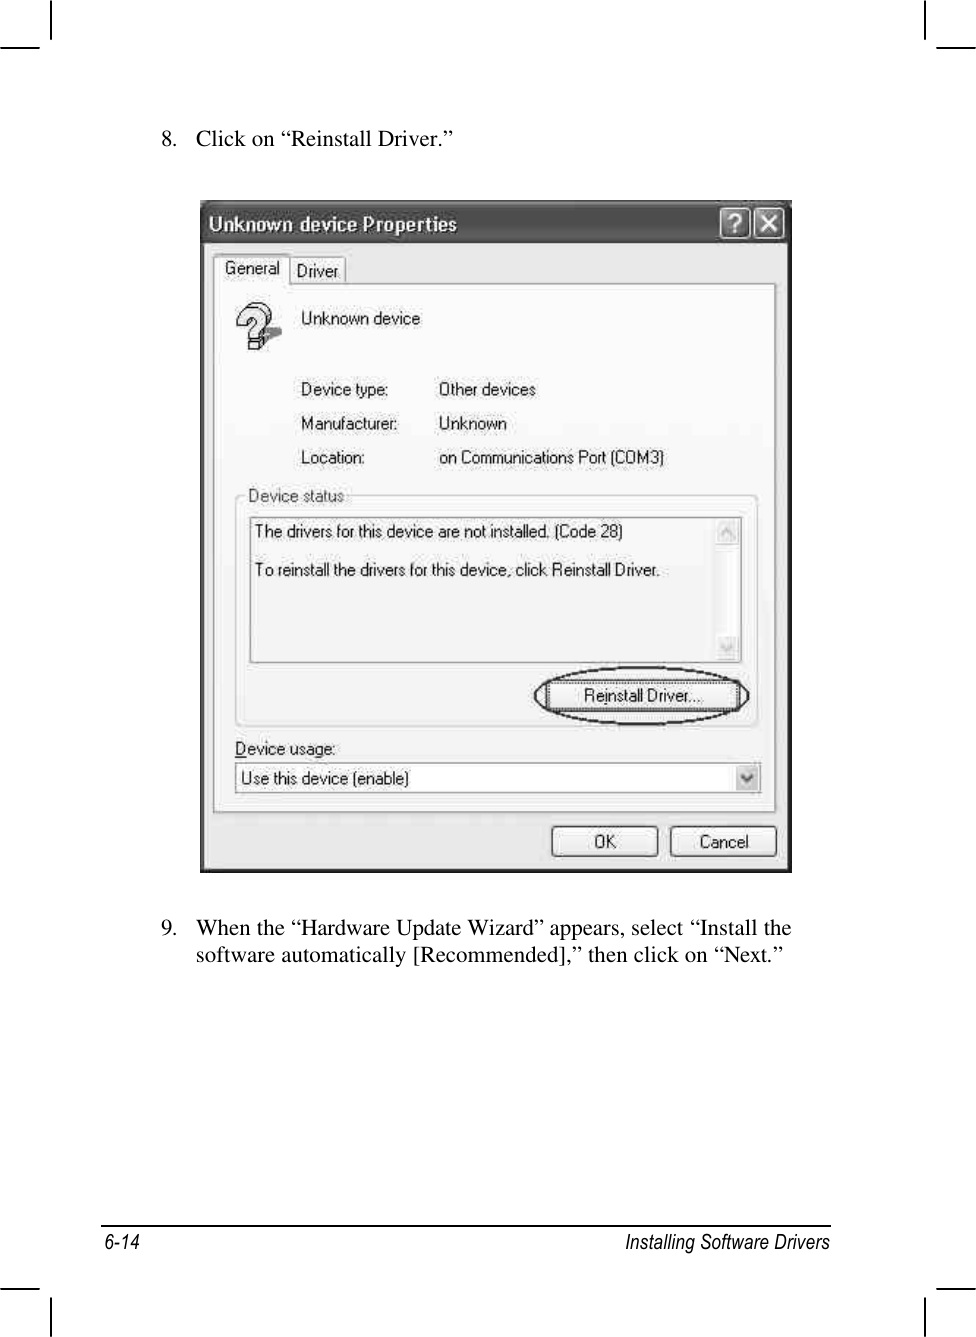 6-14 Installing Software Drivers8. Click on “Reinstall Driver.”9. When the “Hardware Update Wizard” appears, select “Install thesoftware automatically [Recommended],” then click on “Next.”